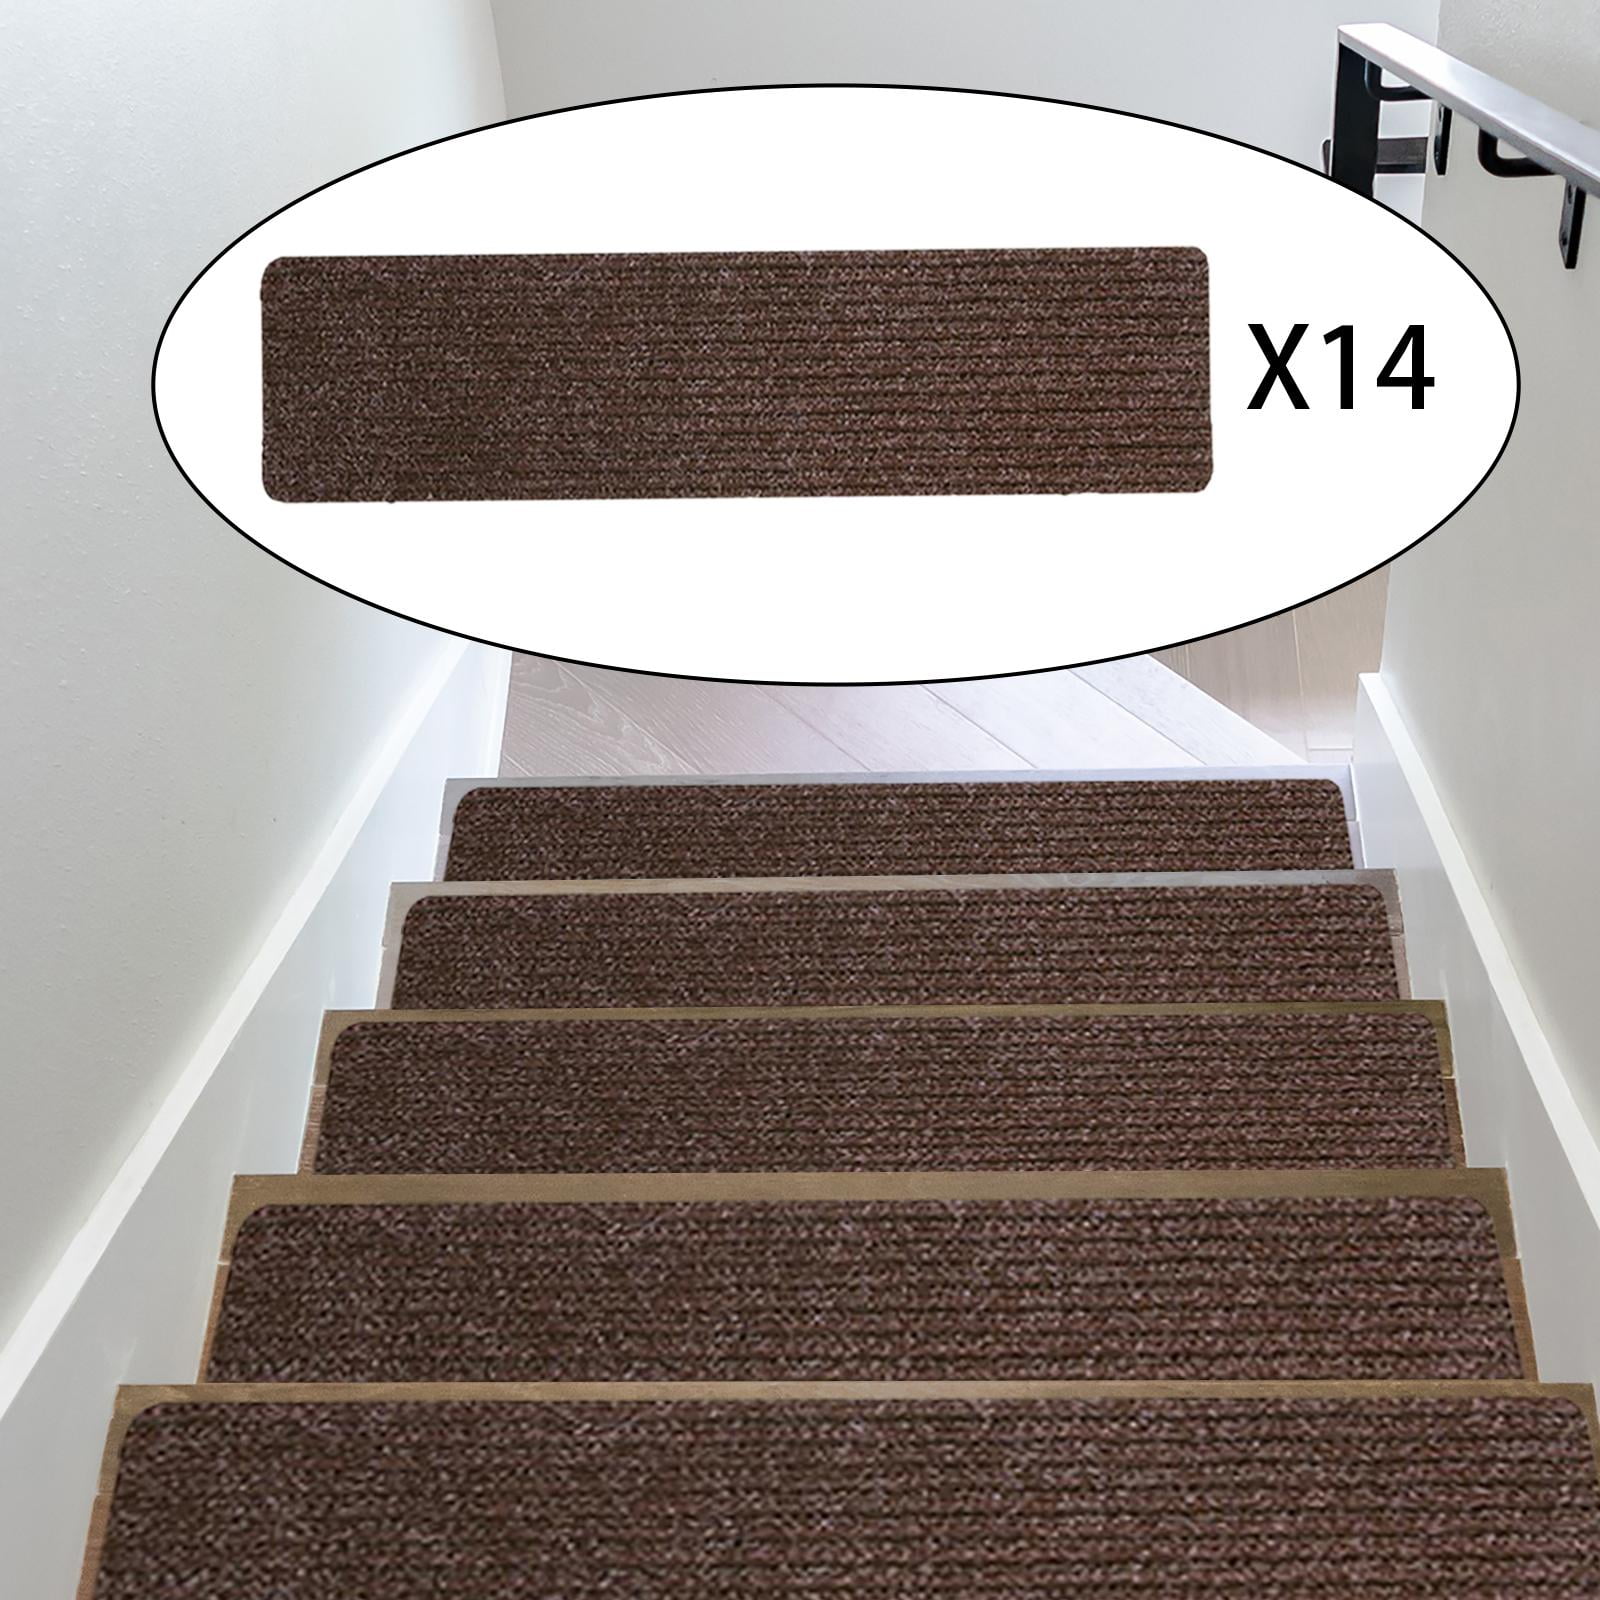 14PCS Mats Step Staircase Stair Tread Carpet Non Slip Mat Protection Cover Pads 